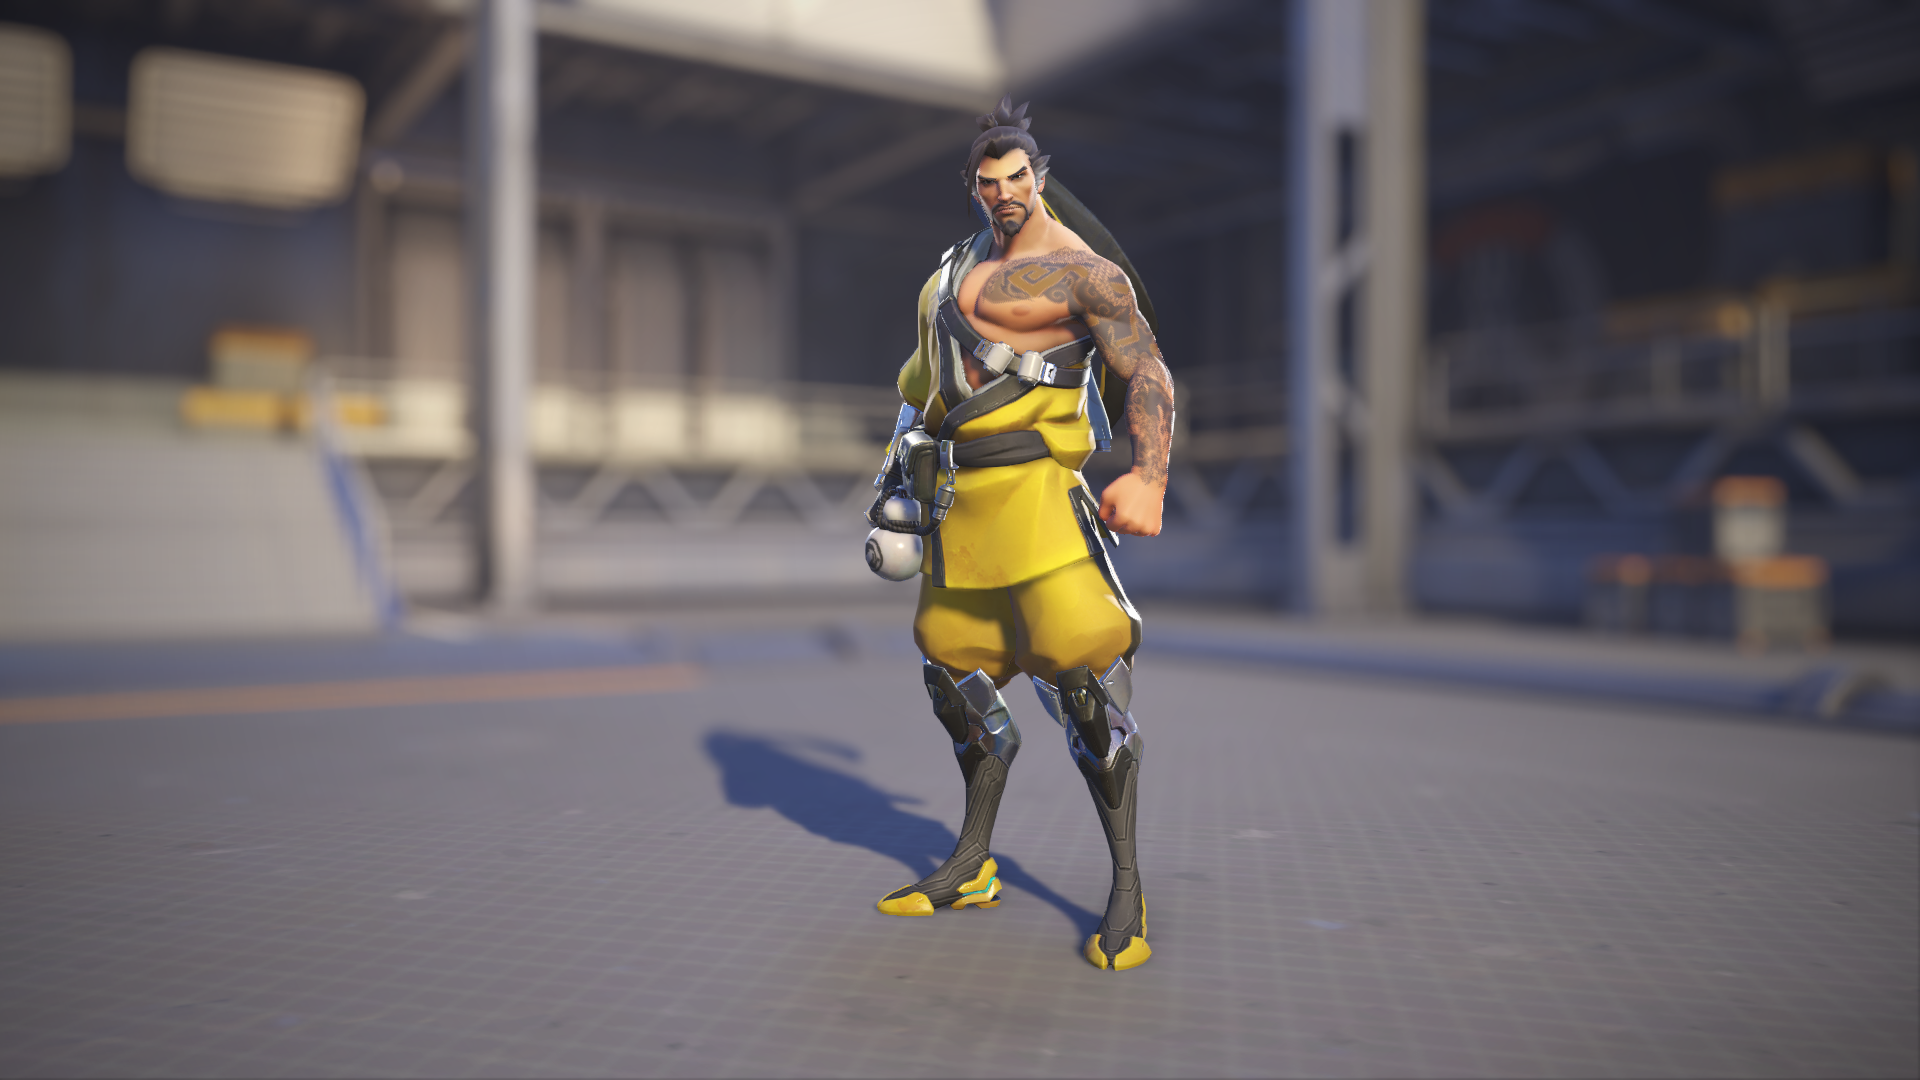 Hanzo models his Dragon skin in Overwatch 2.